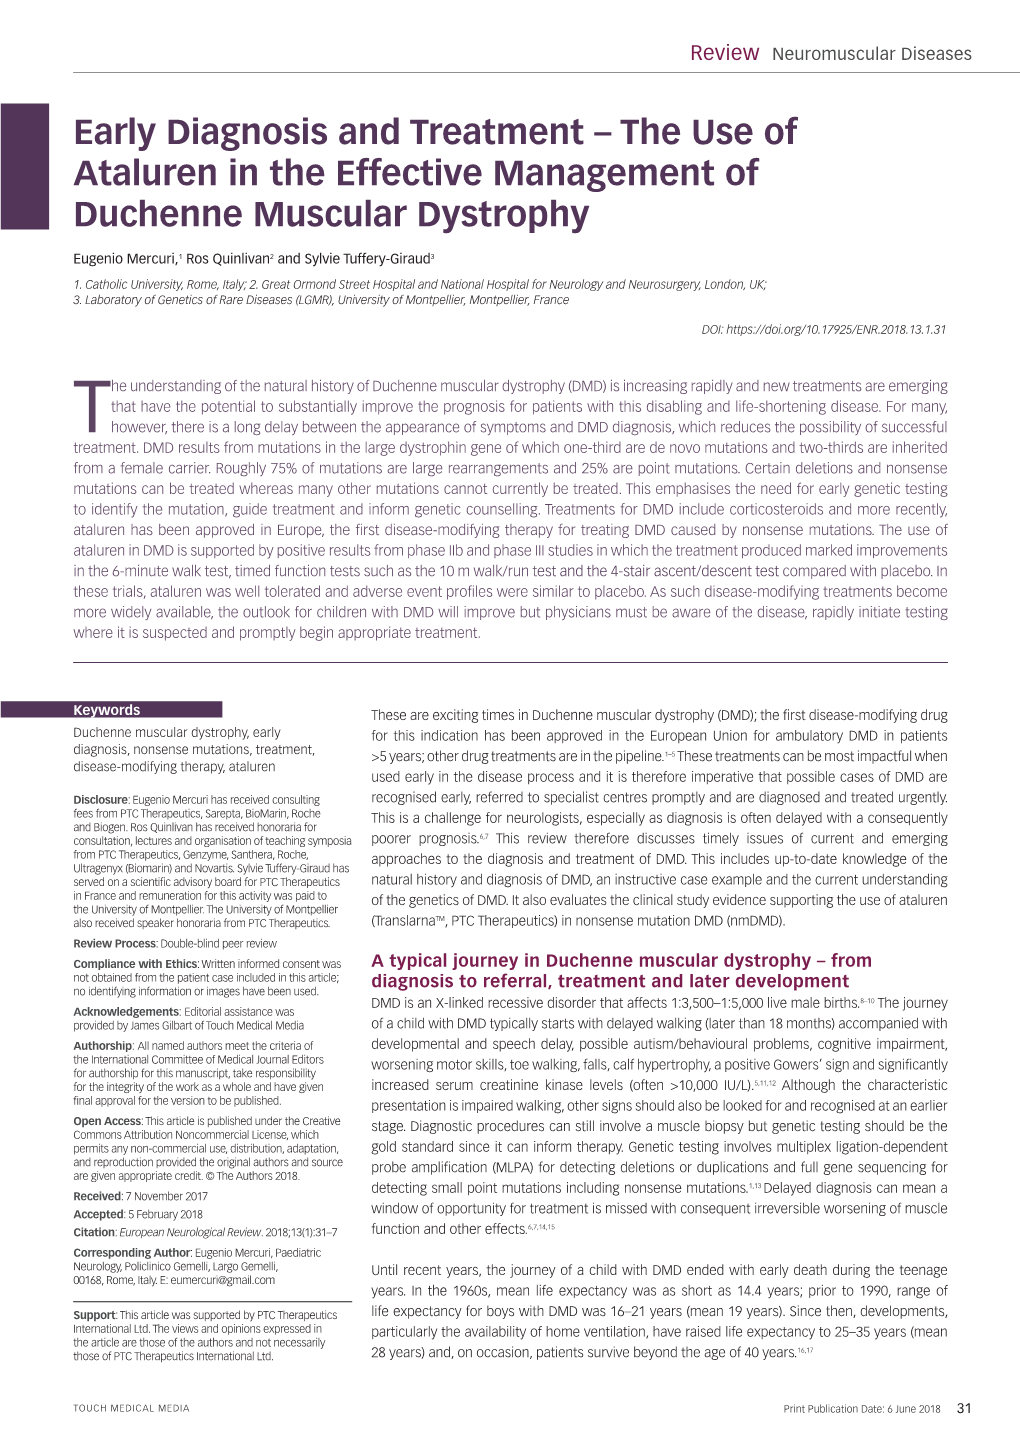 The Use of Ataluren in the Effective Management of Duchenne Muscular Dystrophy